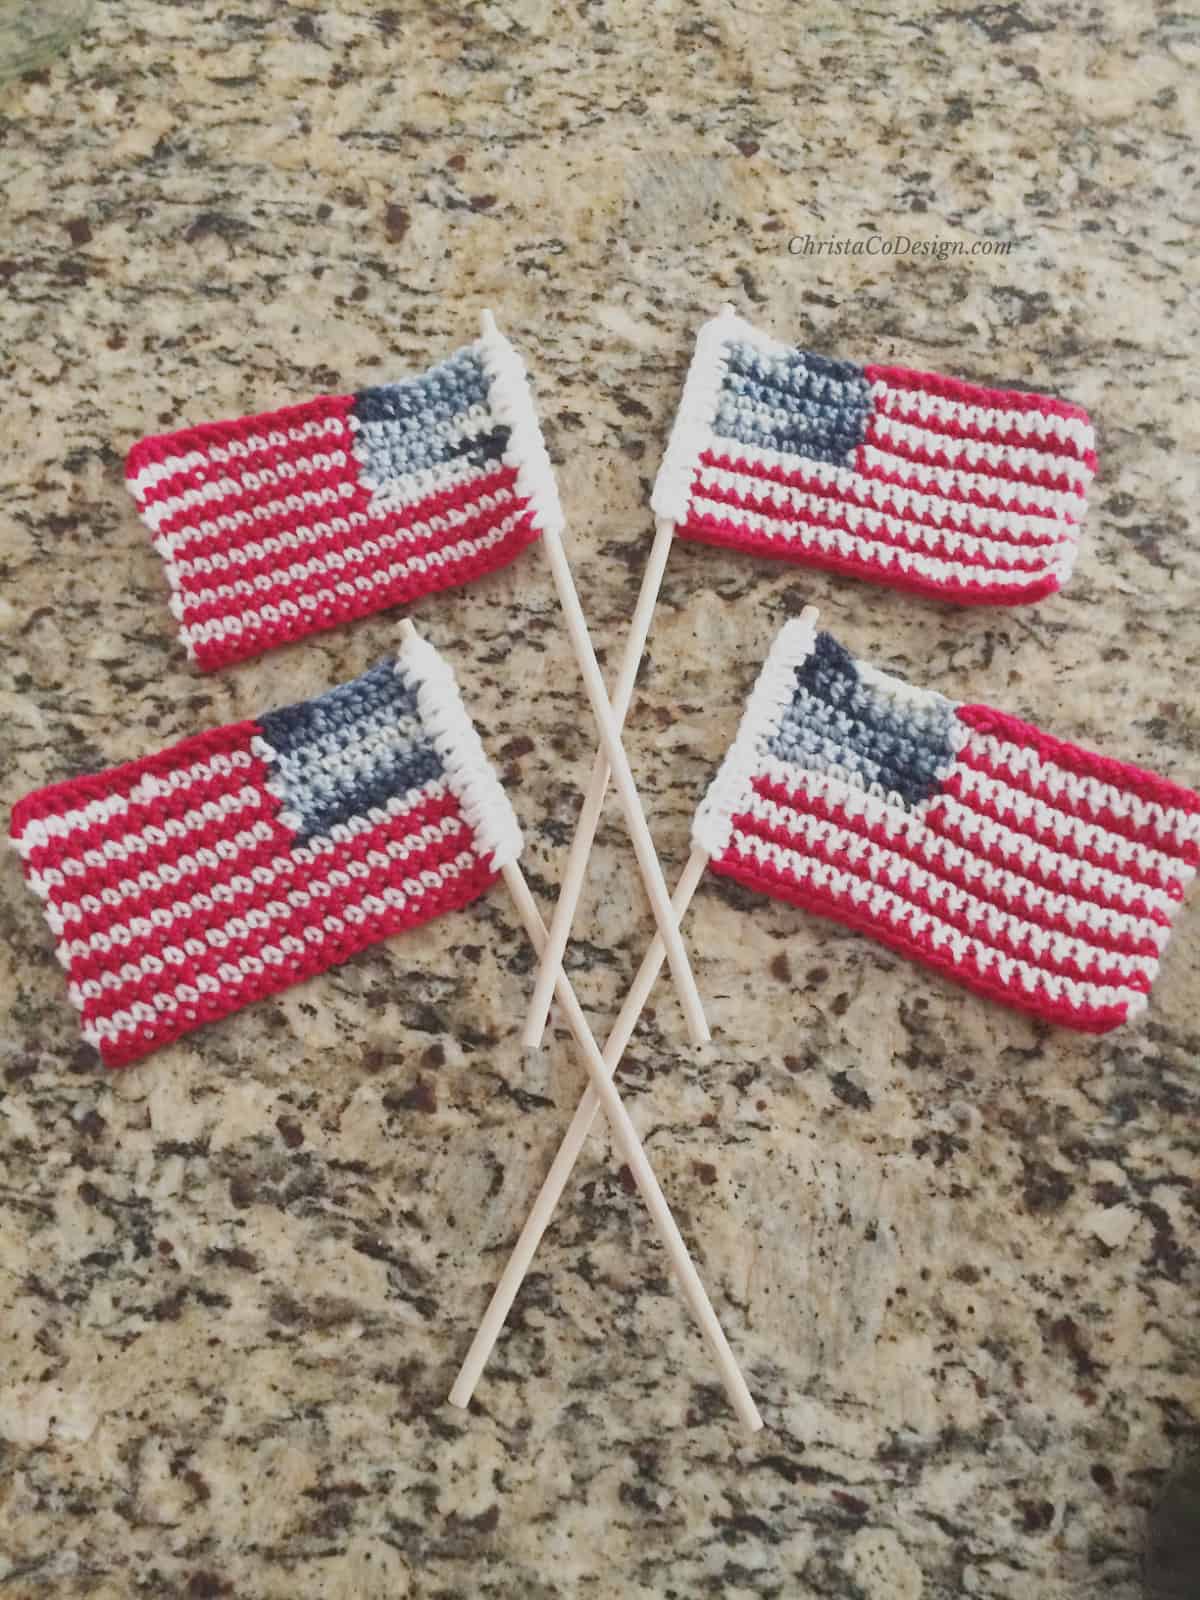 4 crochet American flags with dowels crossed at center on counter.